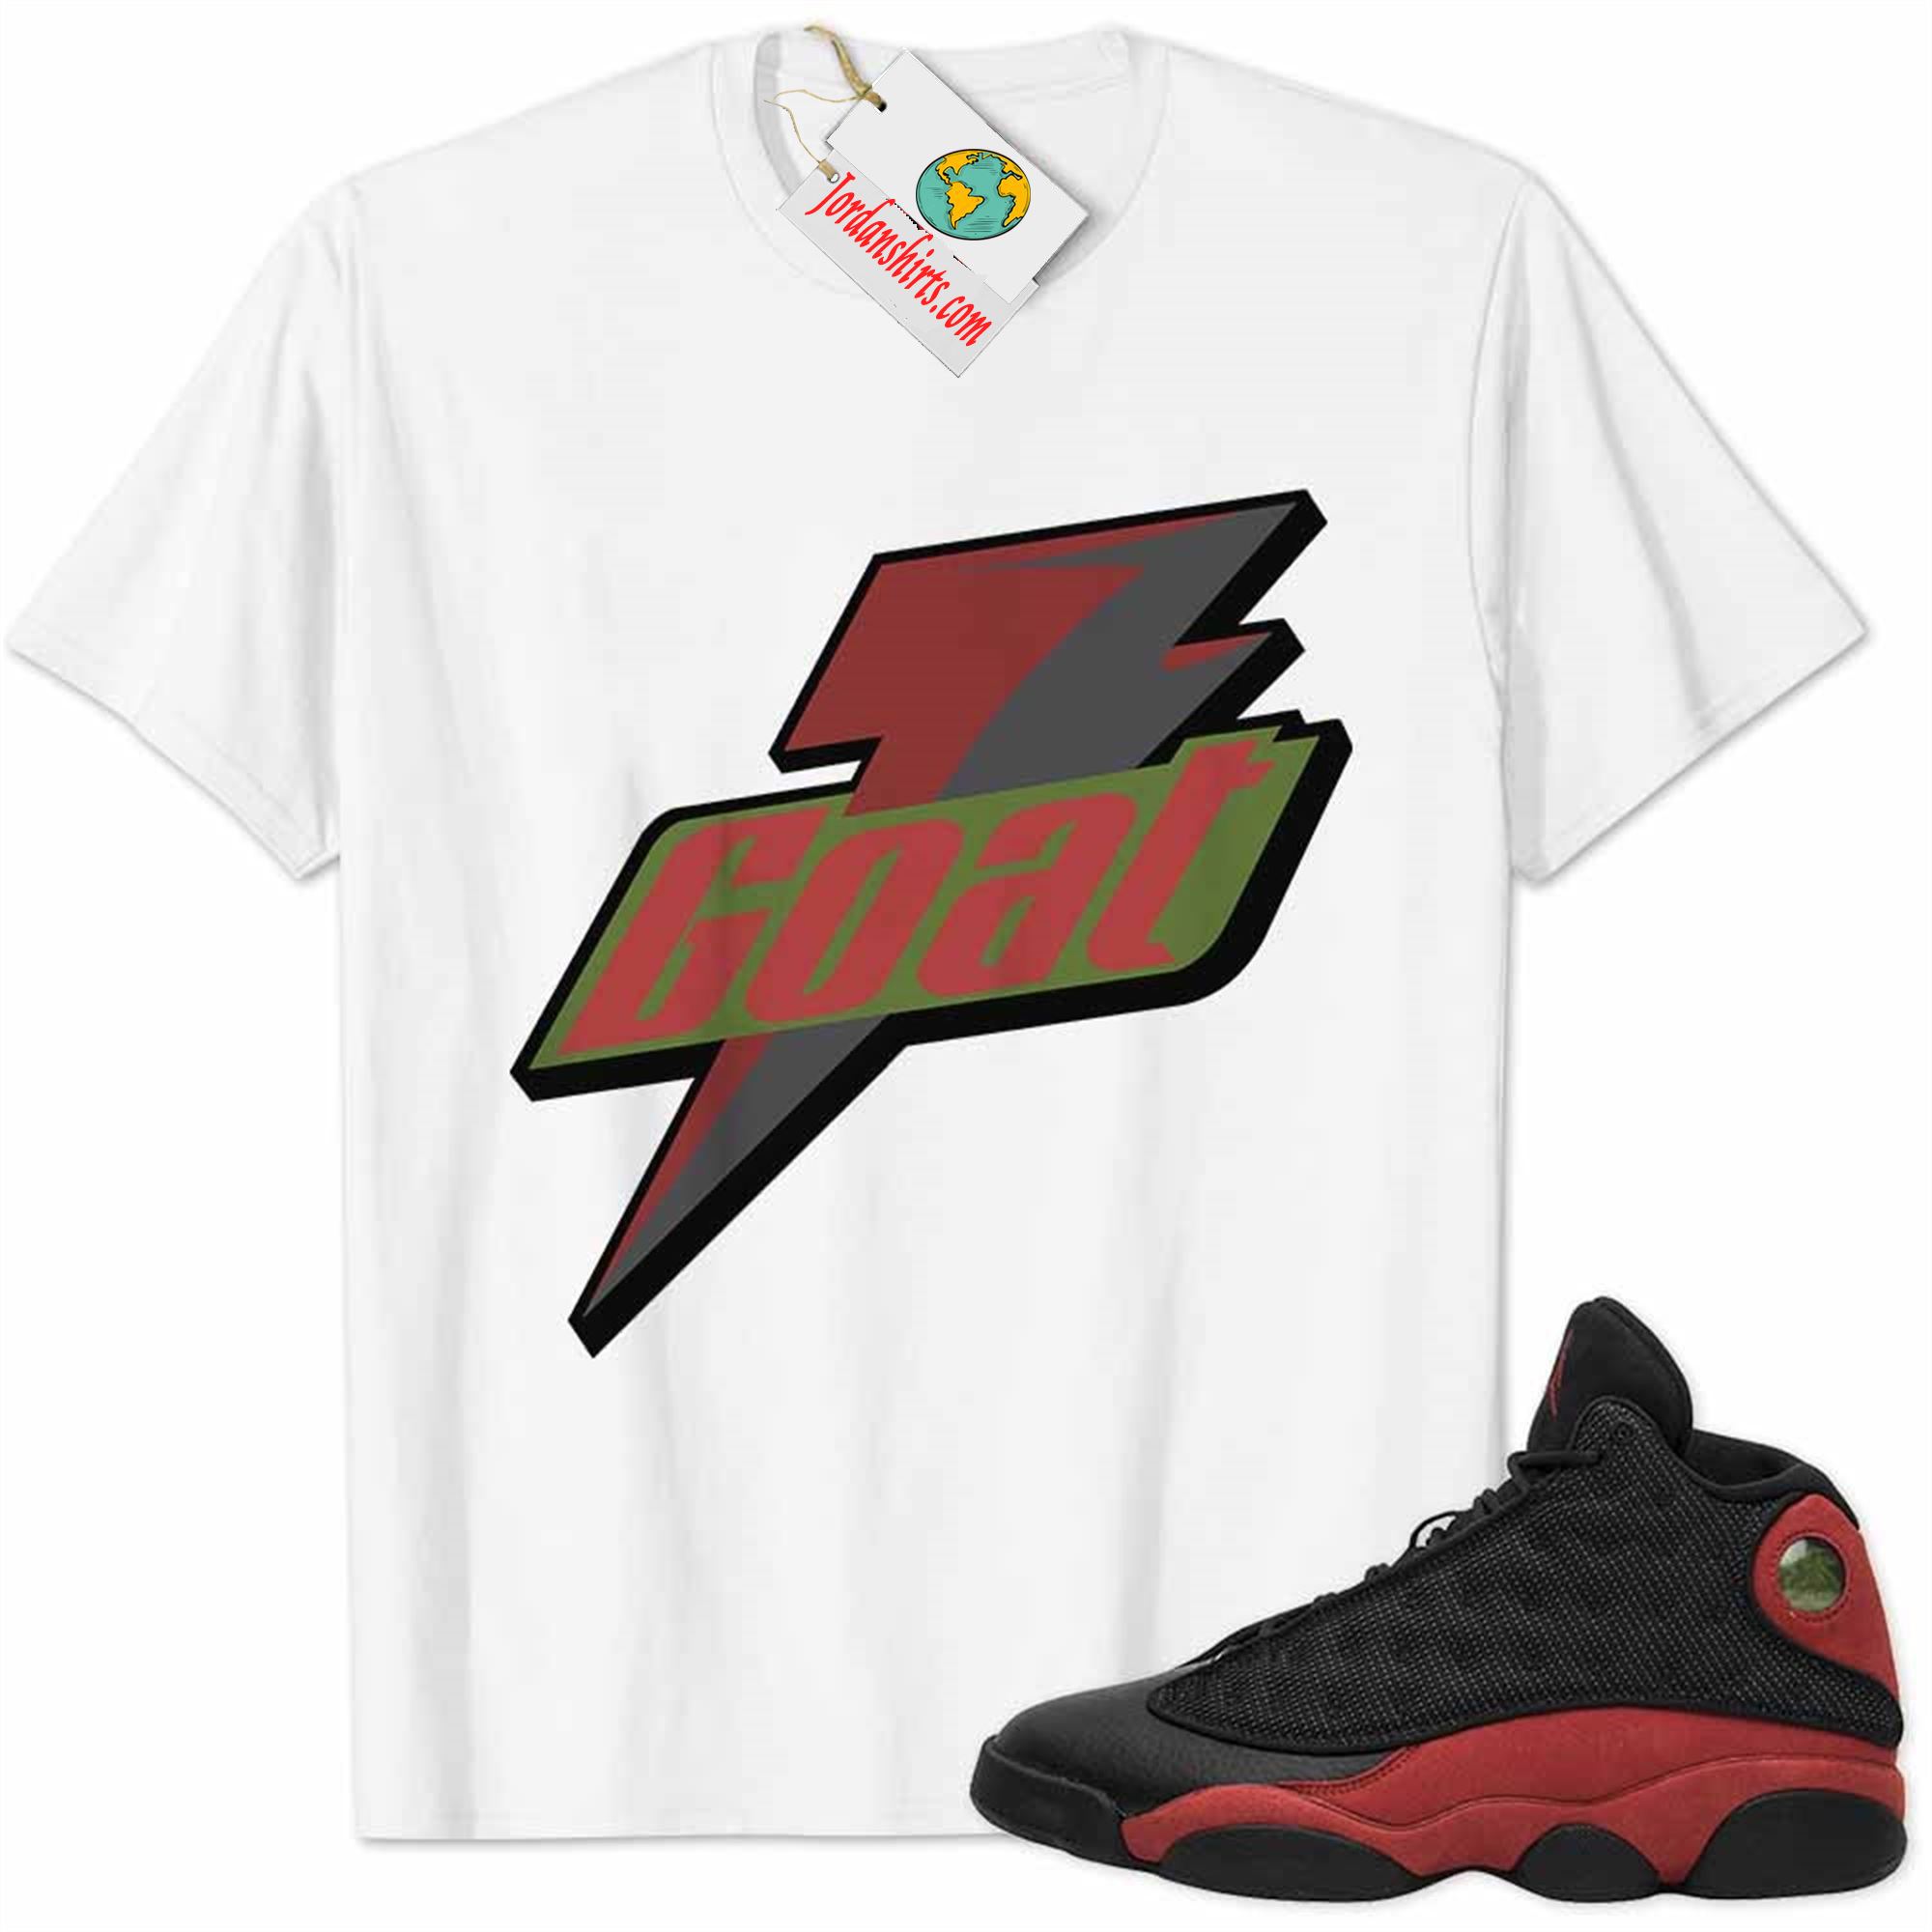 Jordan 13 Shirt, Bred 13s Shirt Goat Greatest Of All Time White Size Up To 5xl